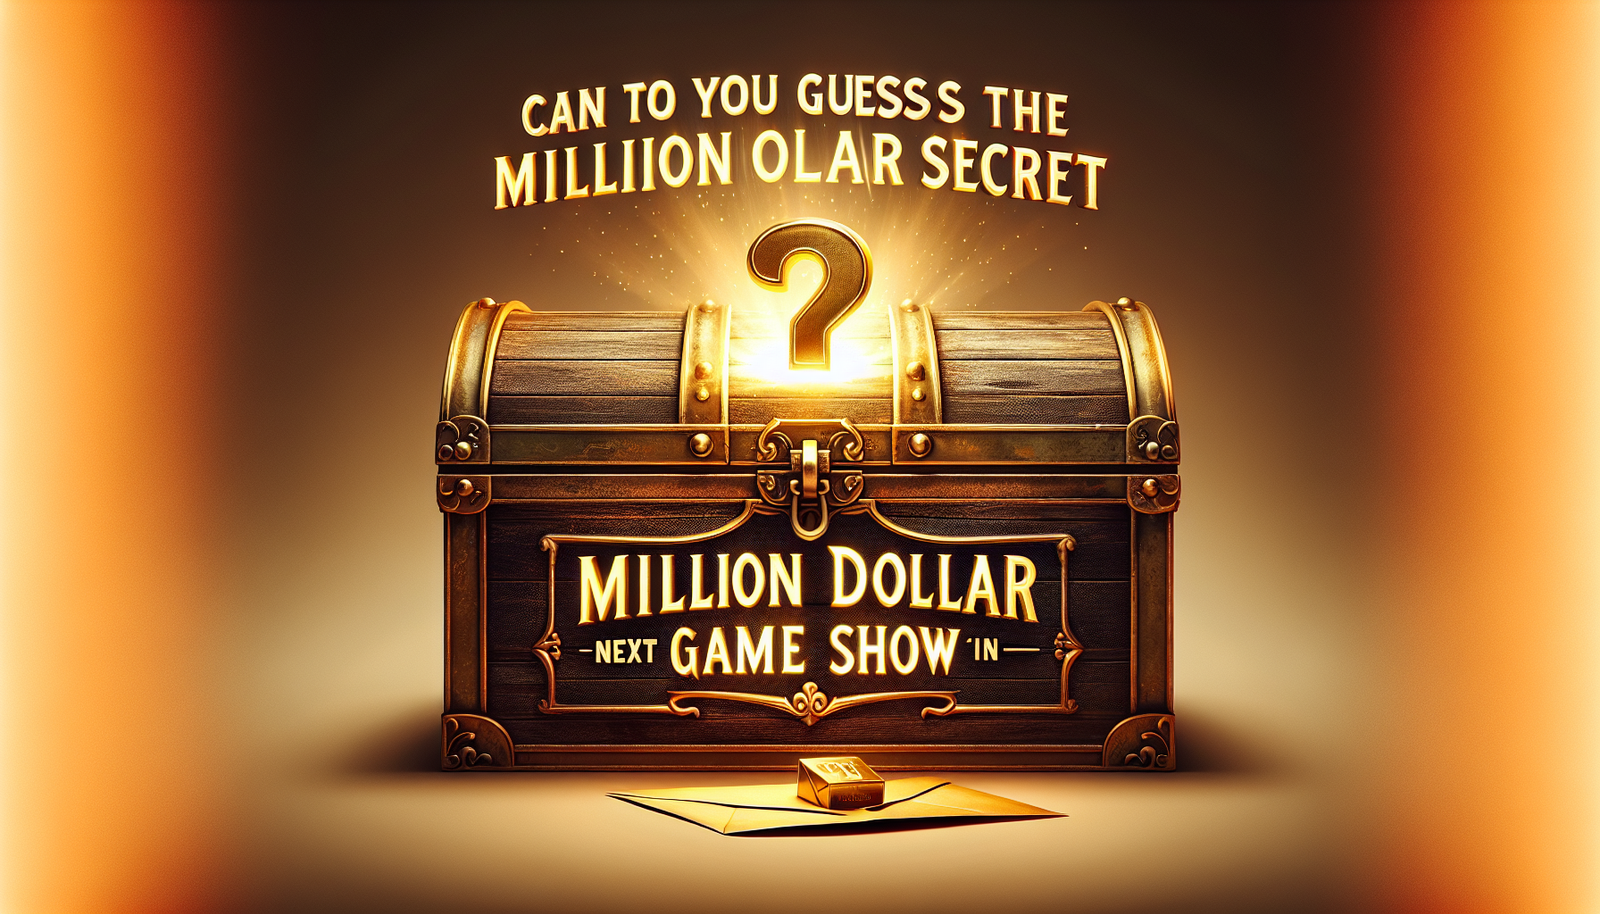 discover the hidden million-dollar secret in netflix's upcoming game show and put your guessing skills to the test. find out more about the exciting new show!